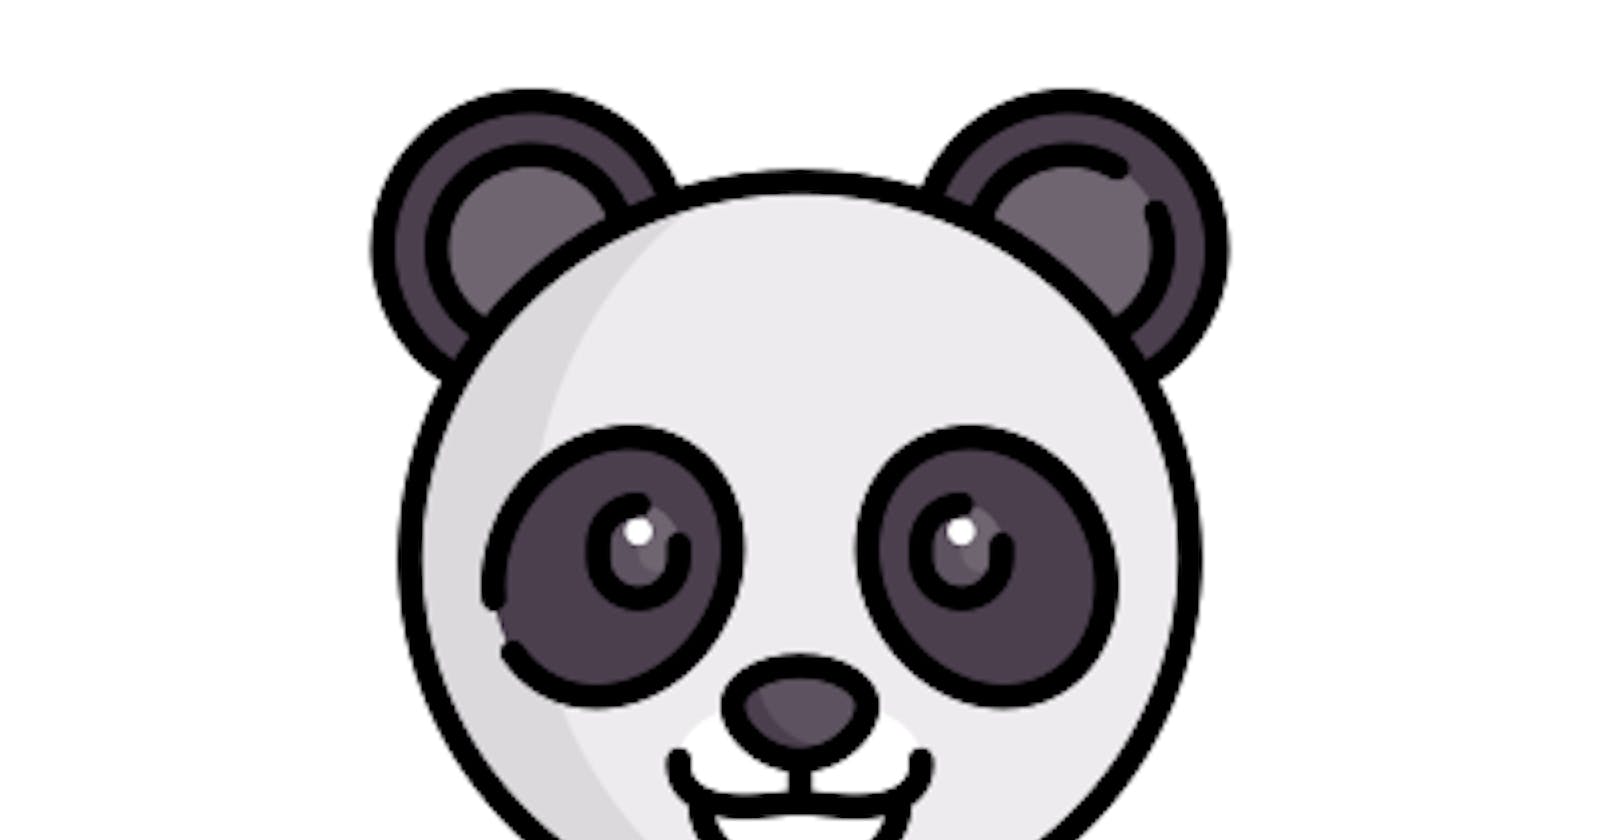 Searching in big DataFrames? Pandas to the rescue!